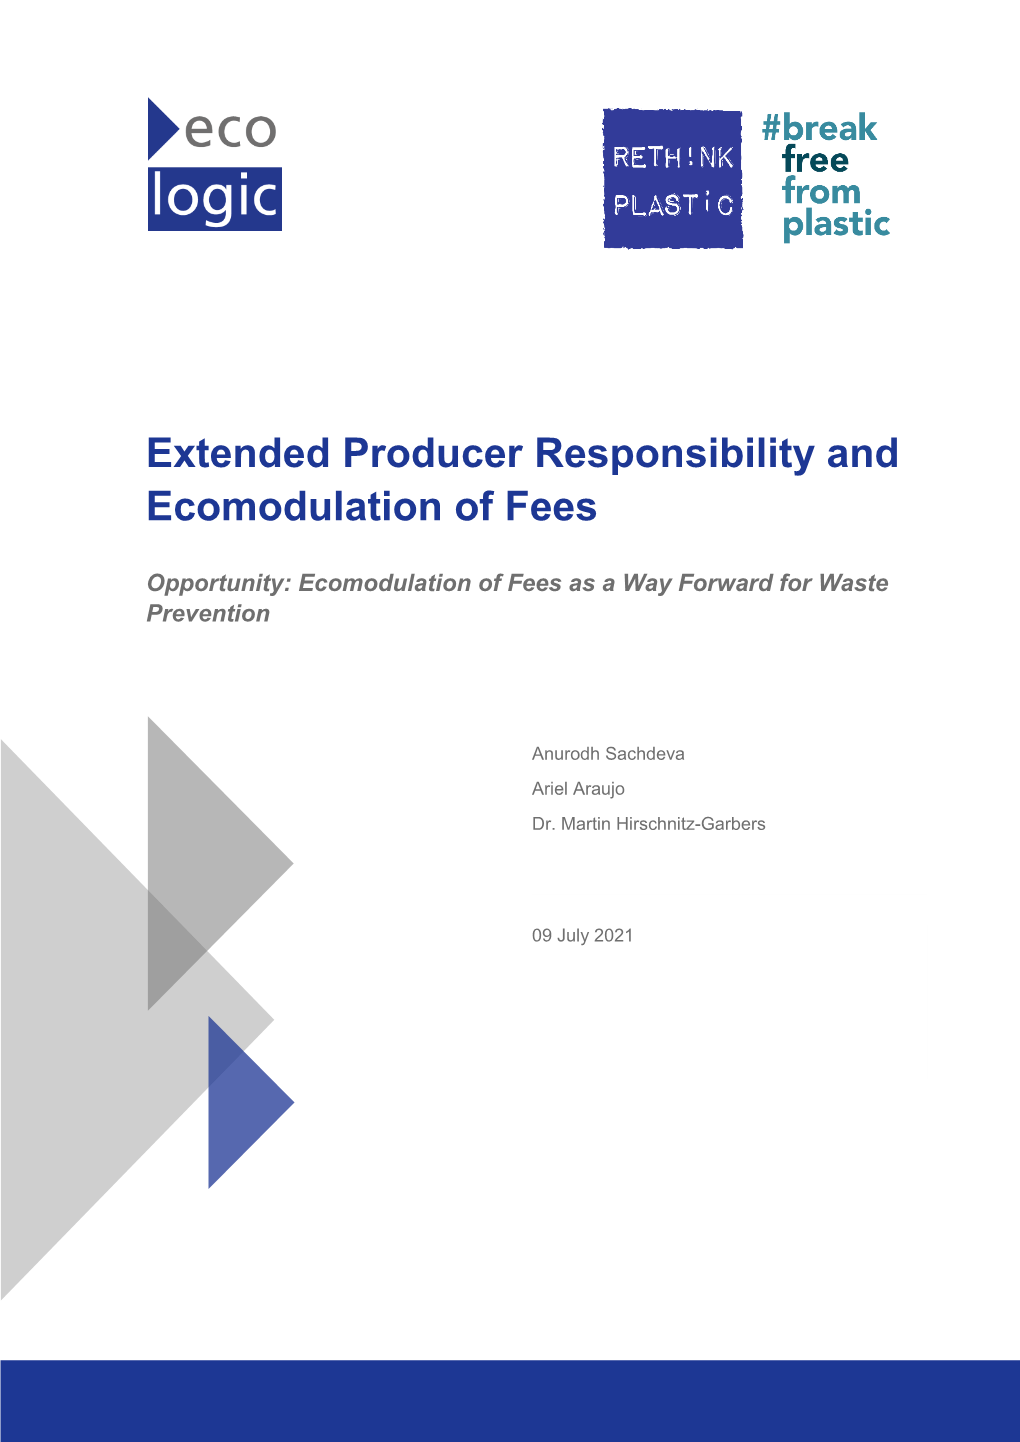 Extended Producer Responsibility and Ecomodulation of Fees – Report